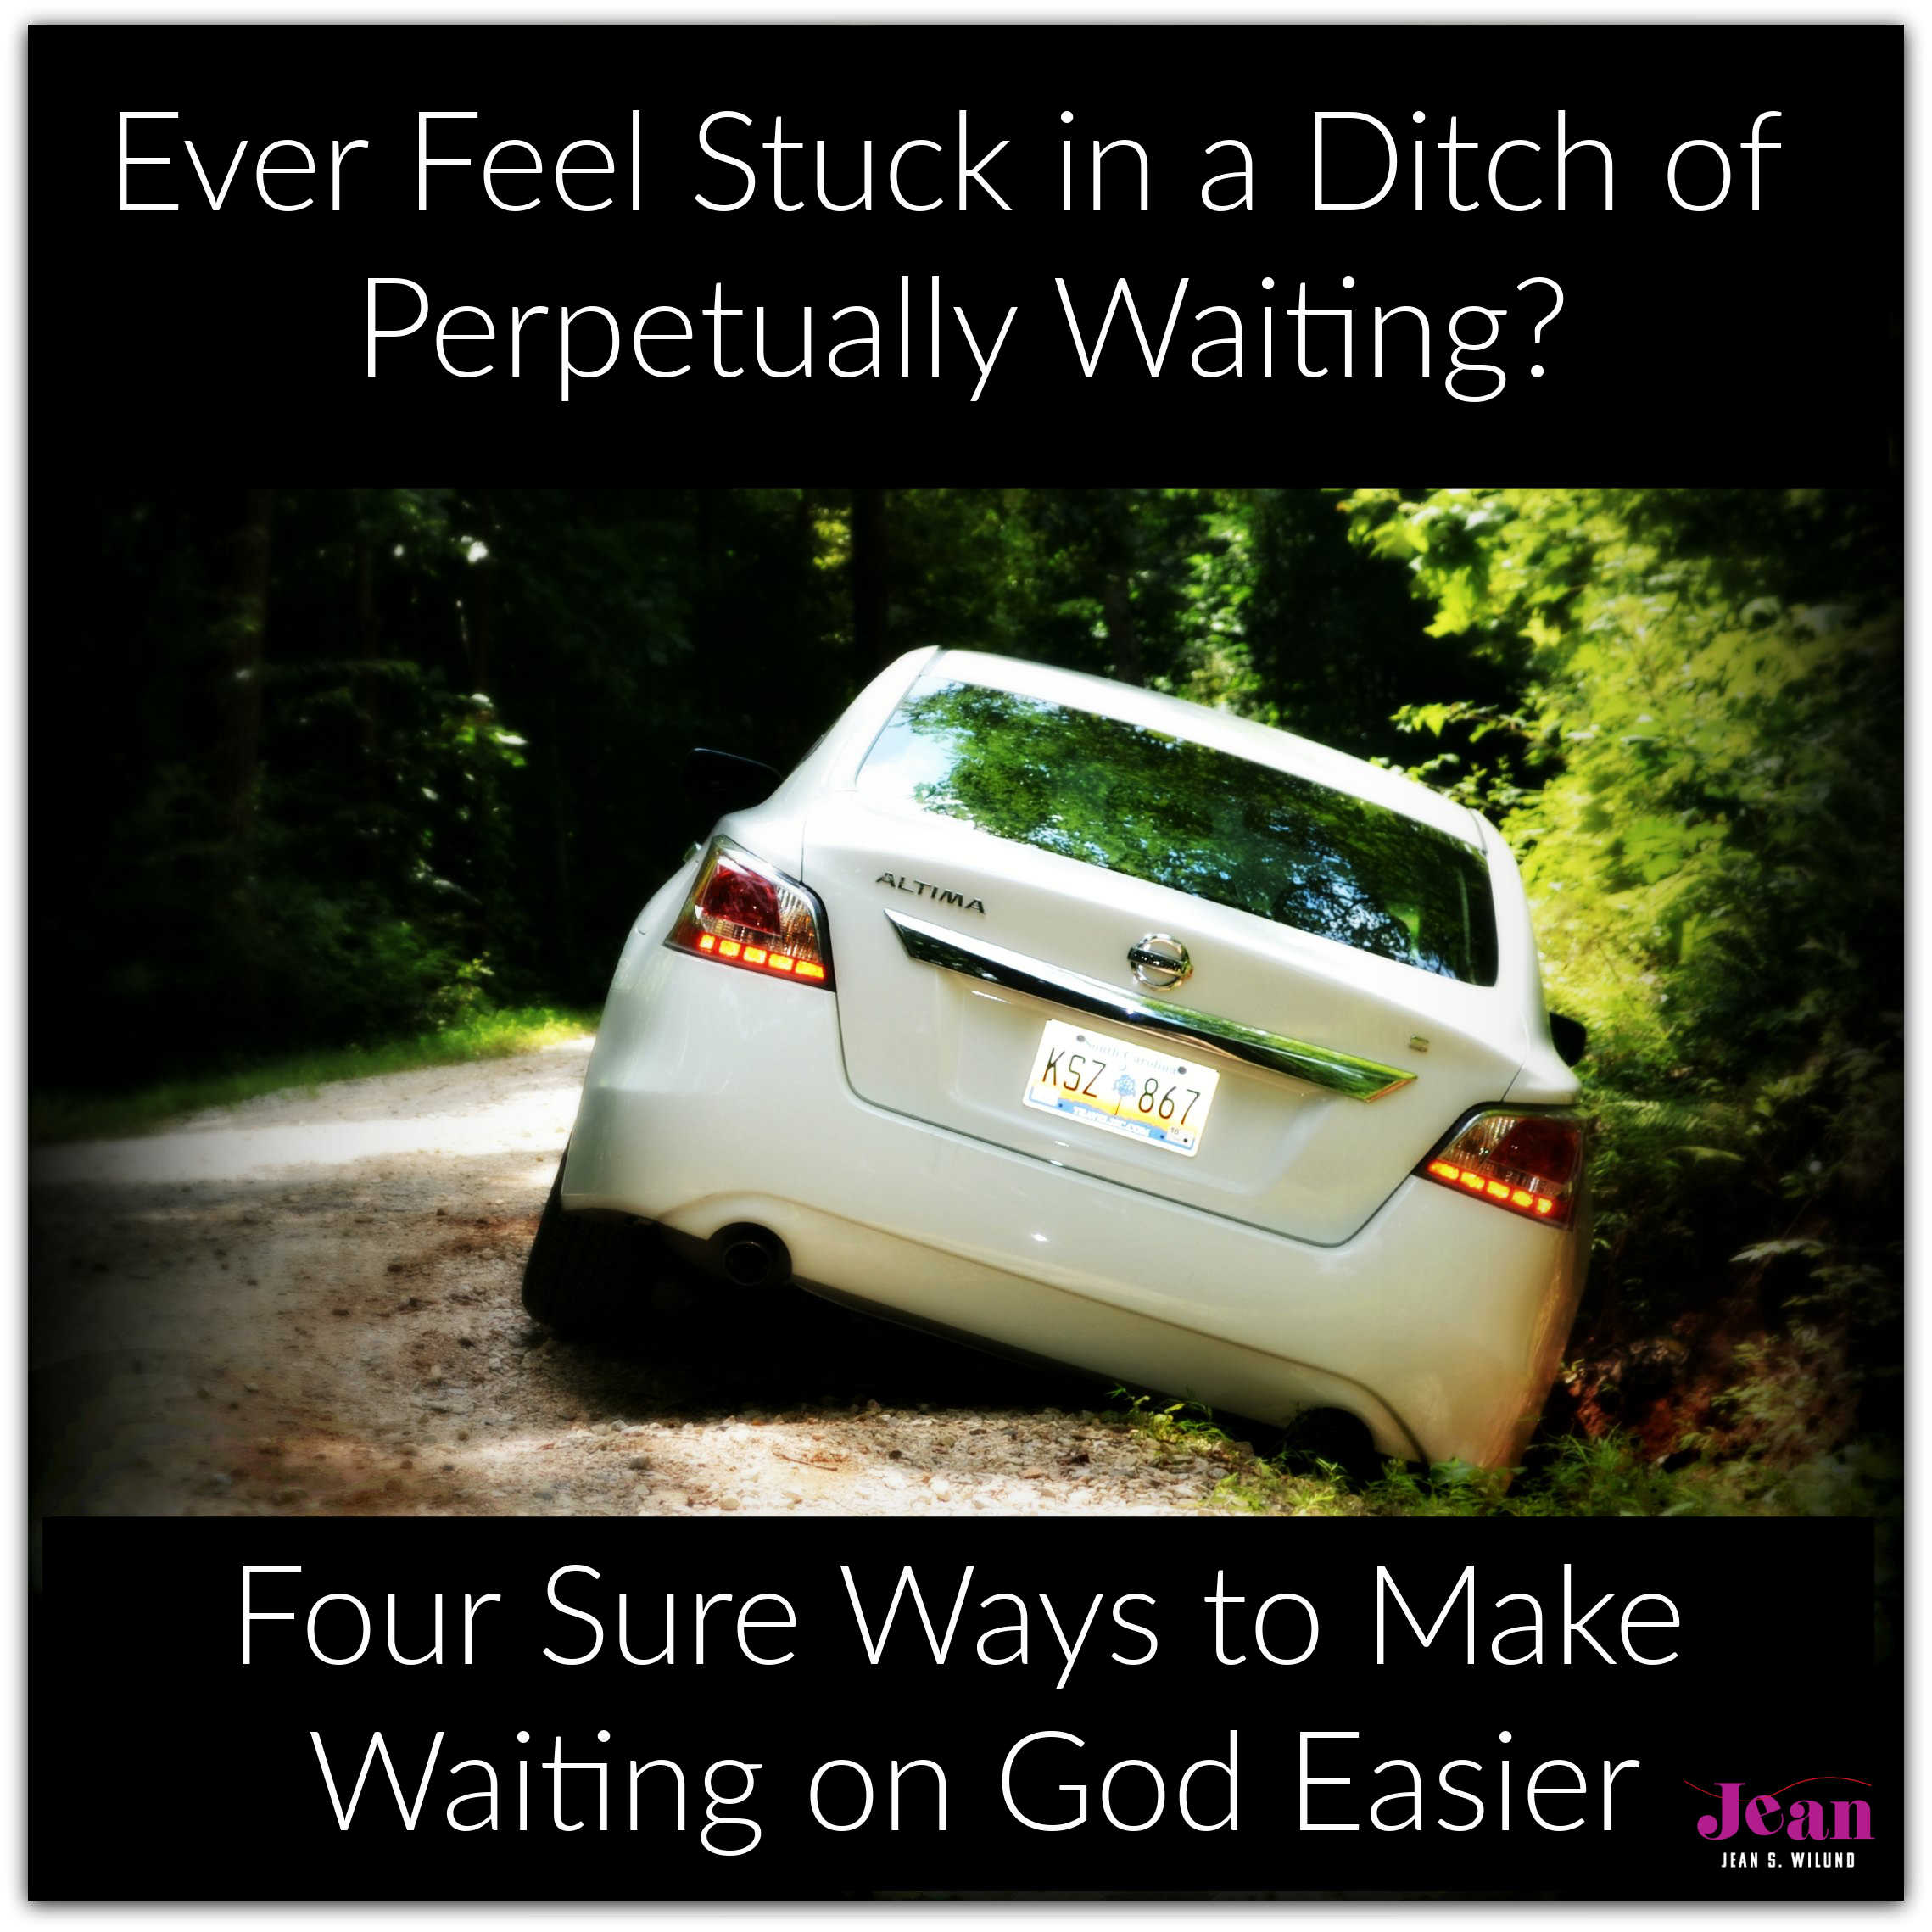 Four Sure Ways to Make Waiting on God Easier